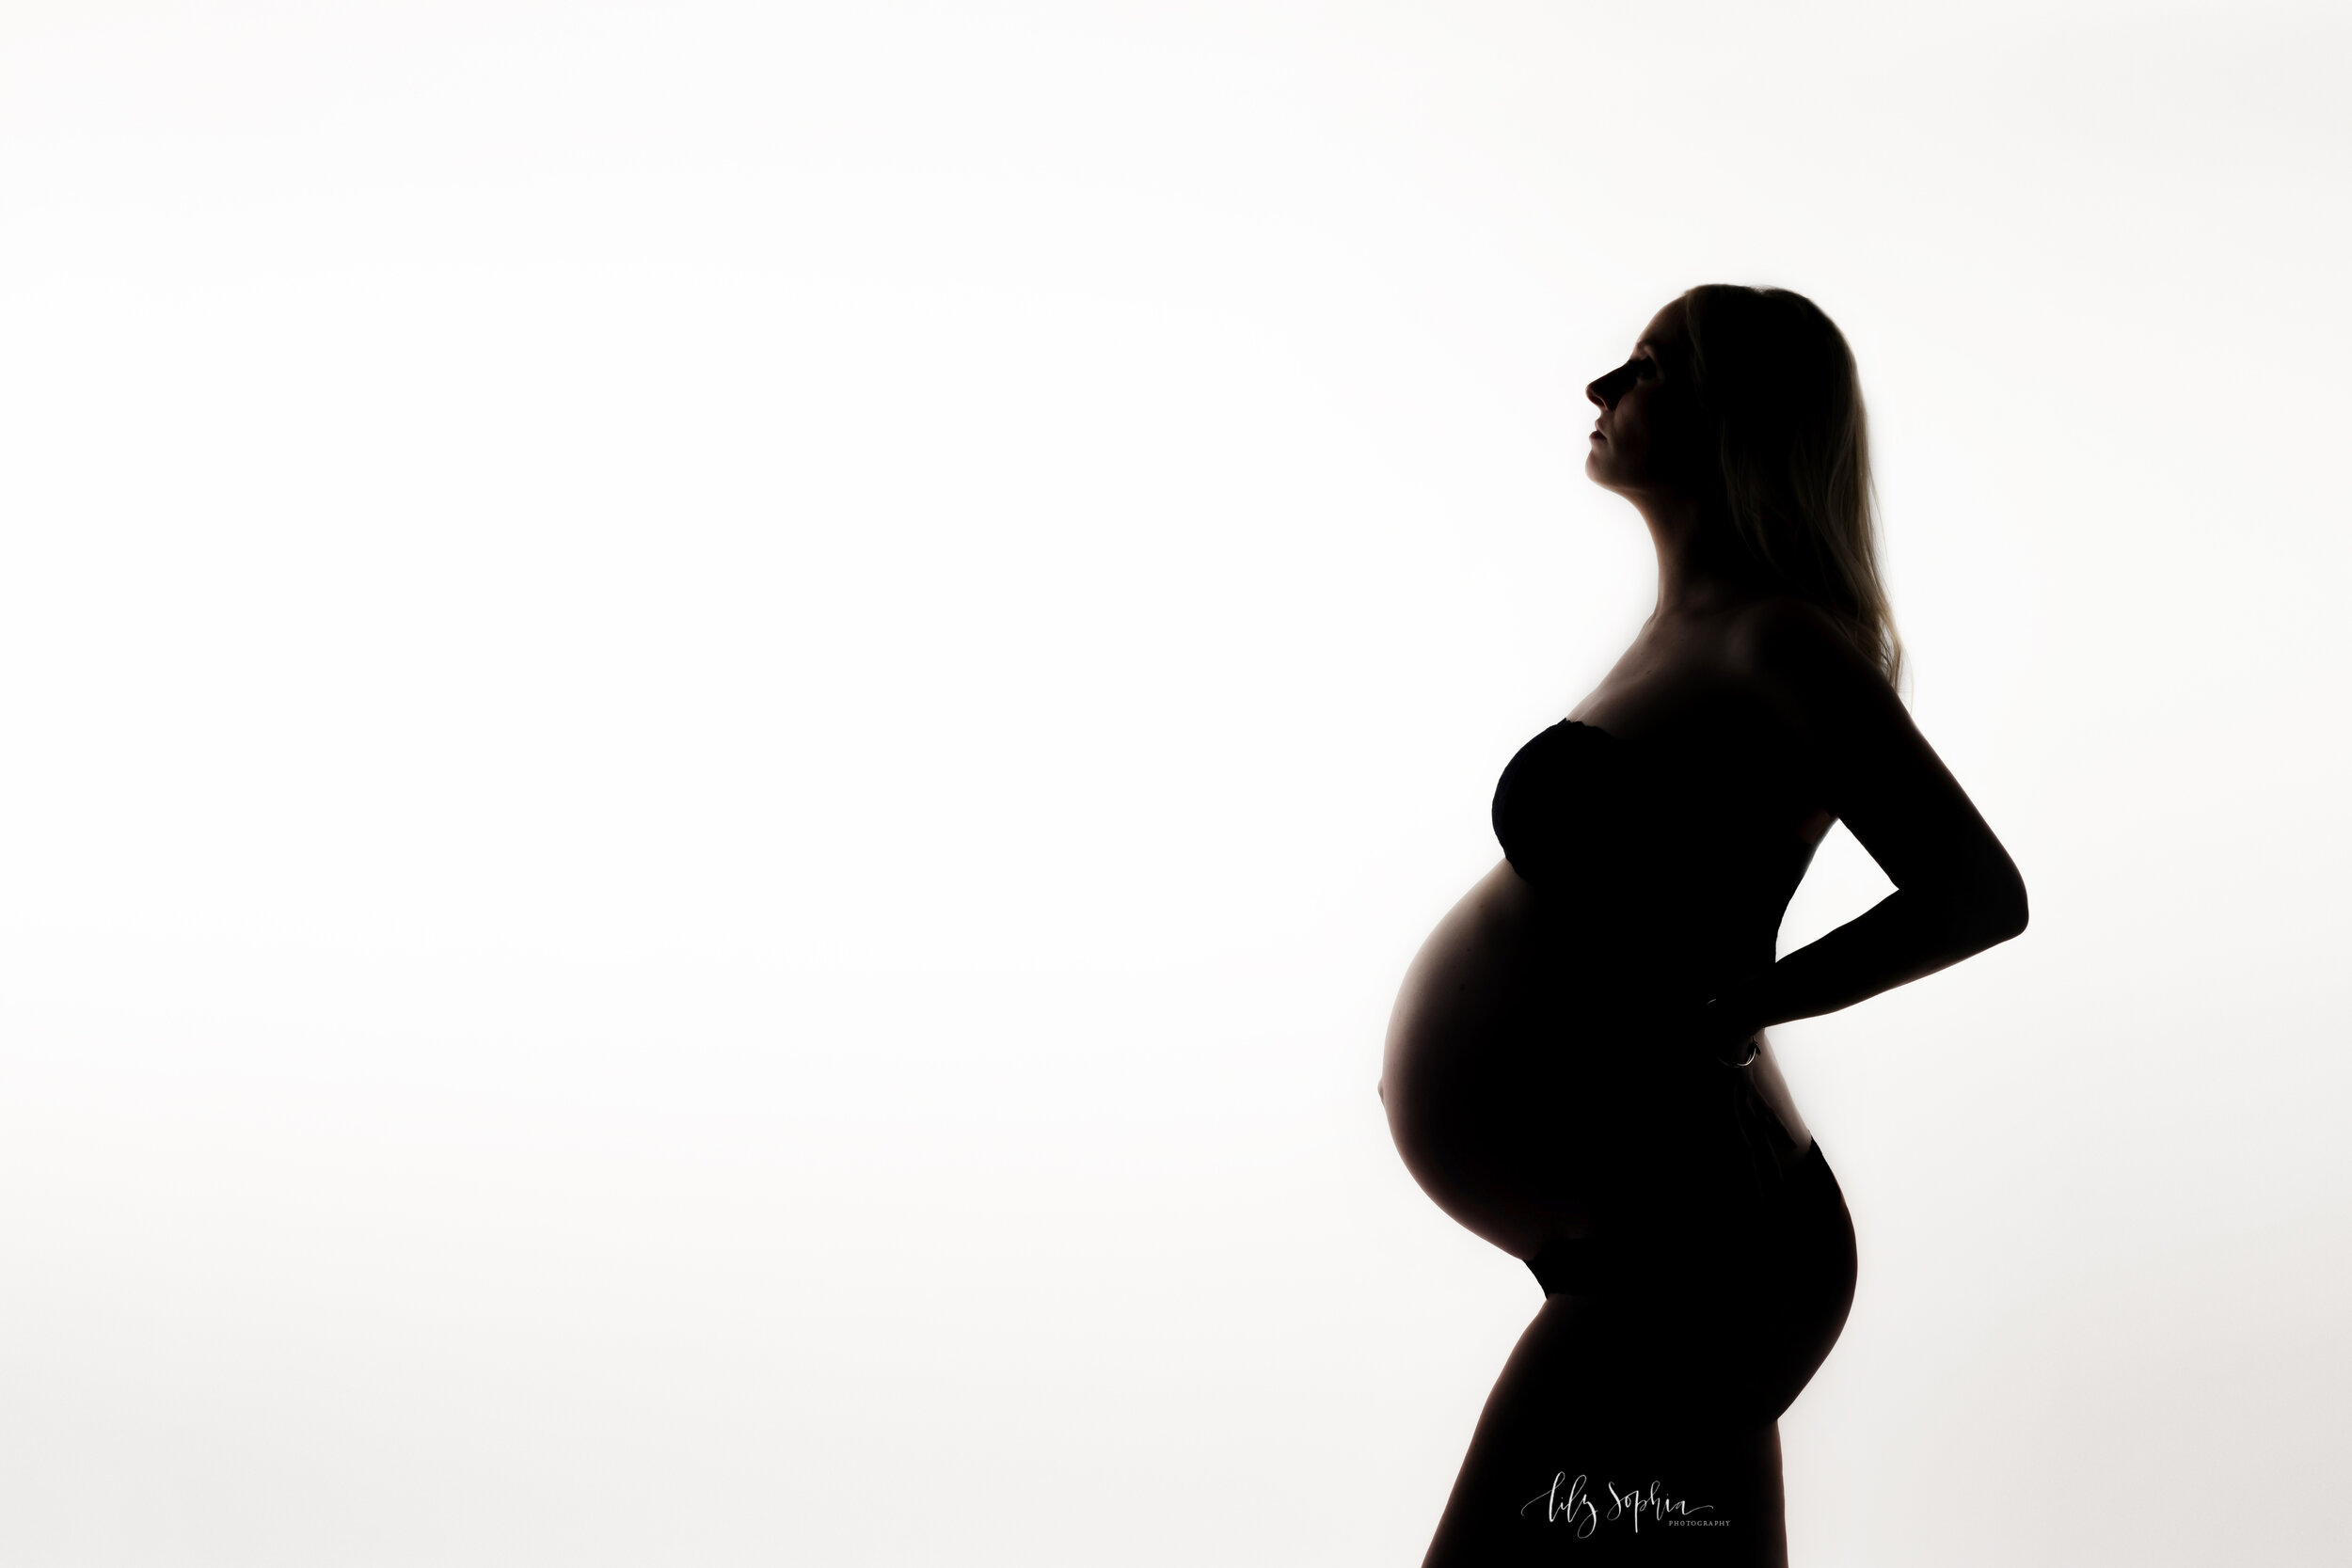  Silhouette editorial maternity fine art image of beautiful pregnant woman with long blonde hair dressed in black lace bra and underwear against a white background in the Atlanta studio of Lily Sophia Photography.  